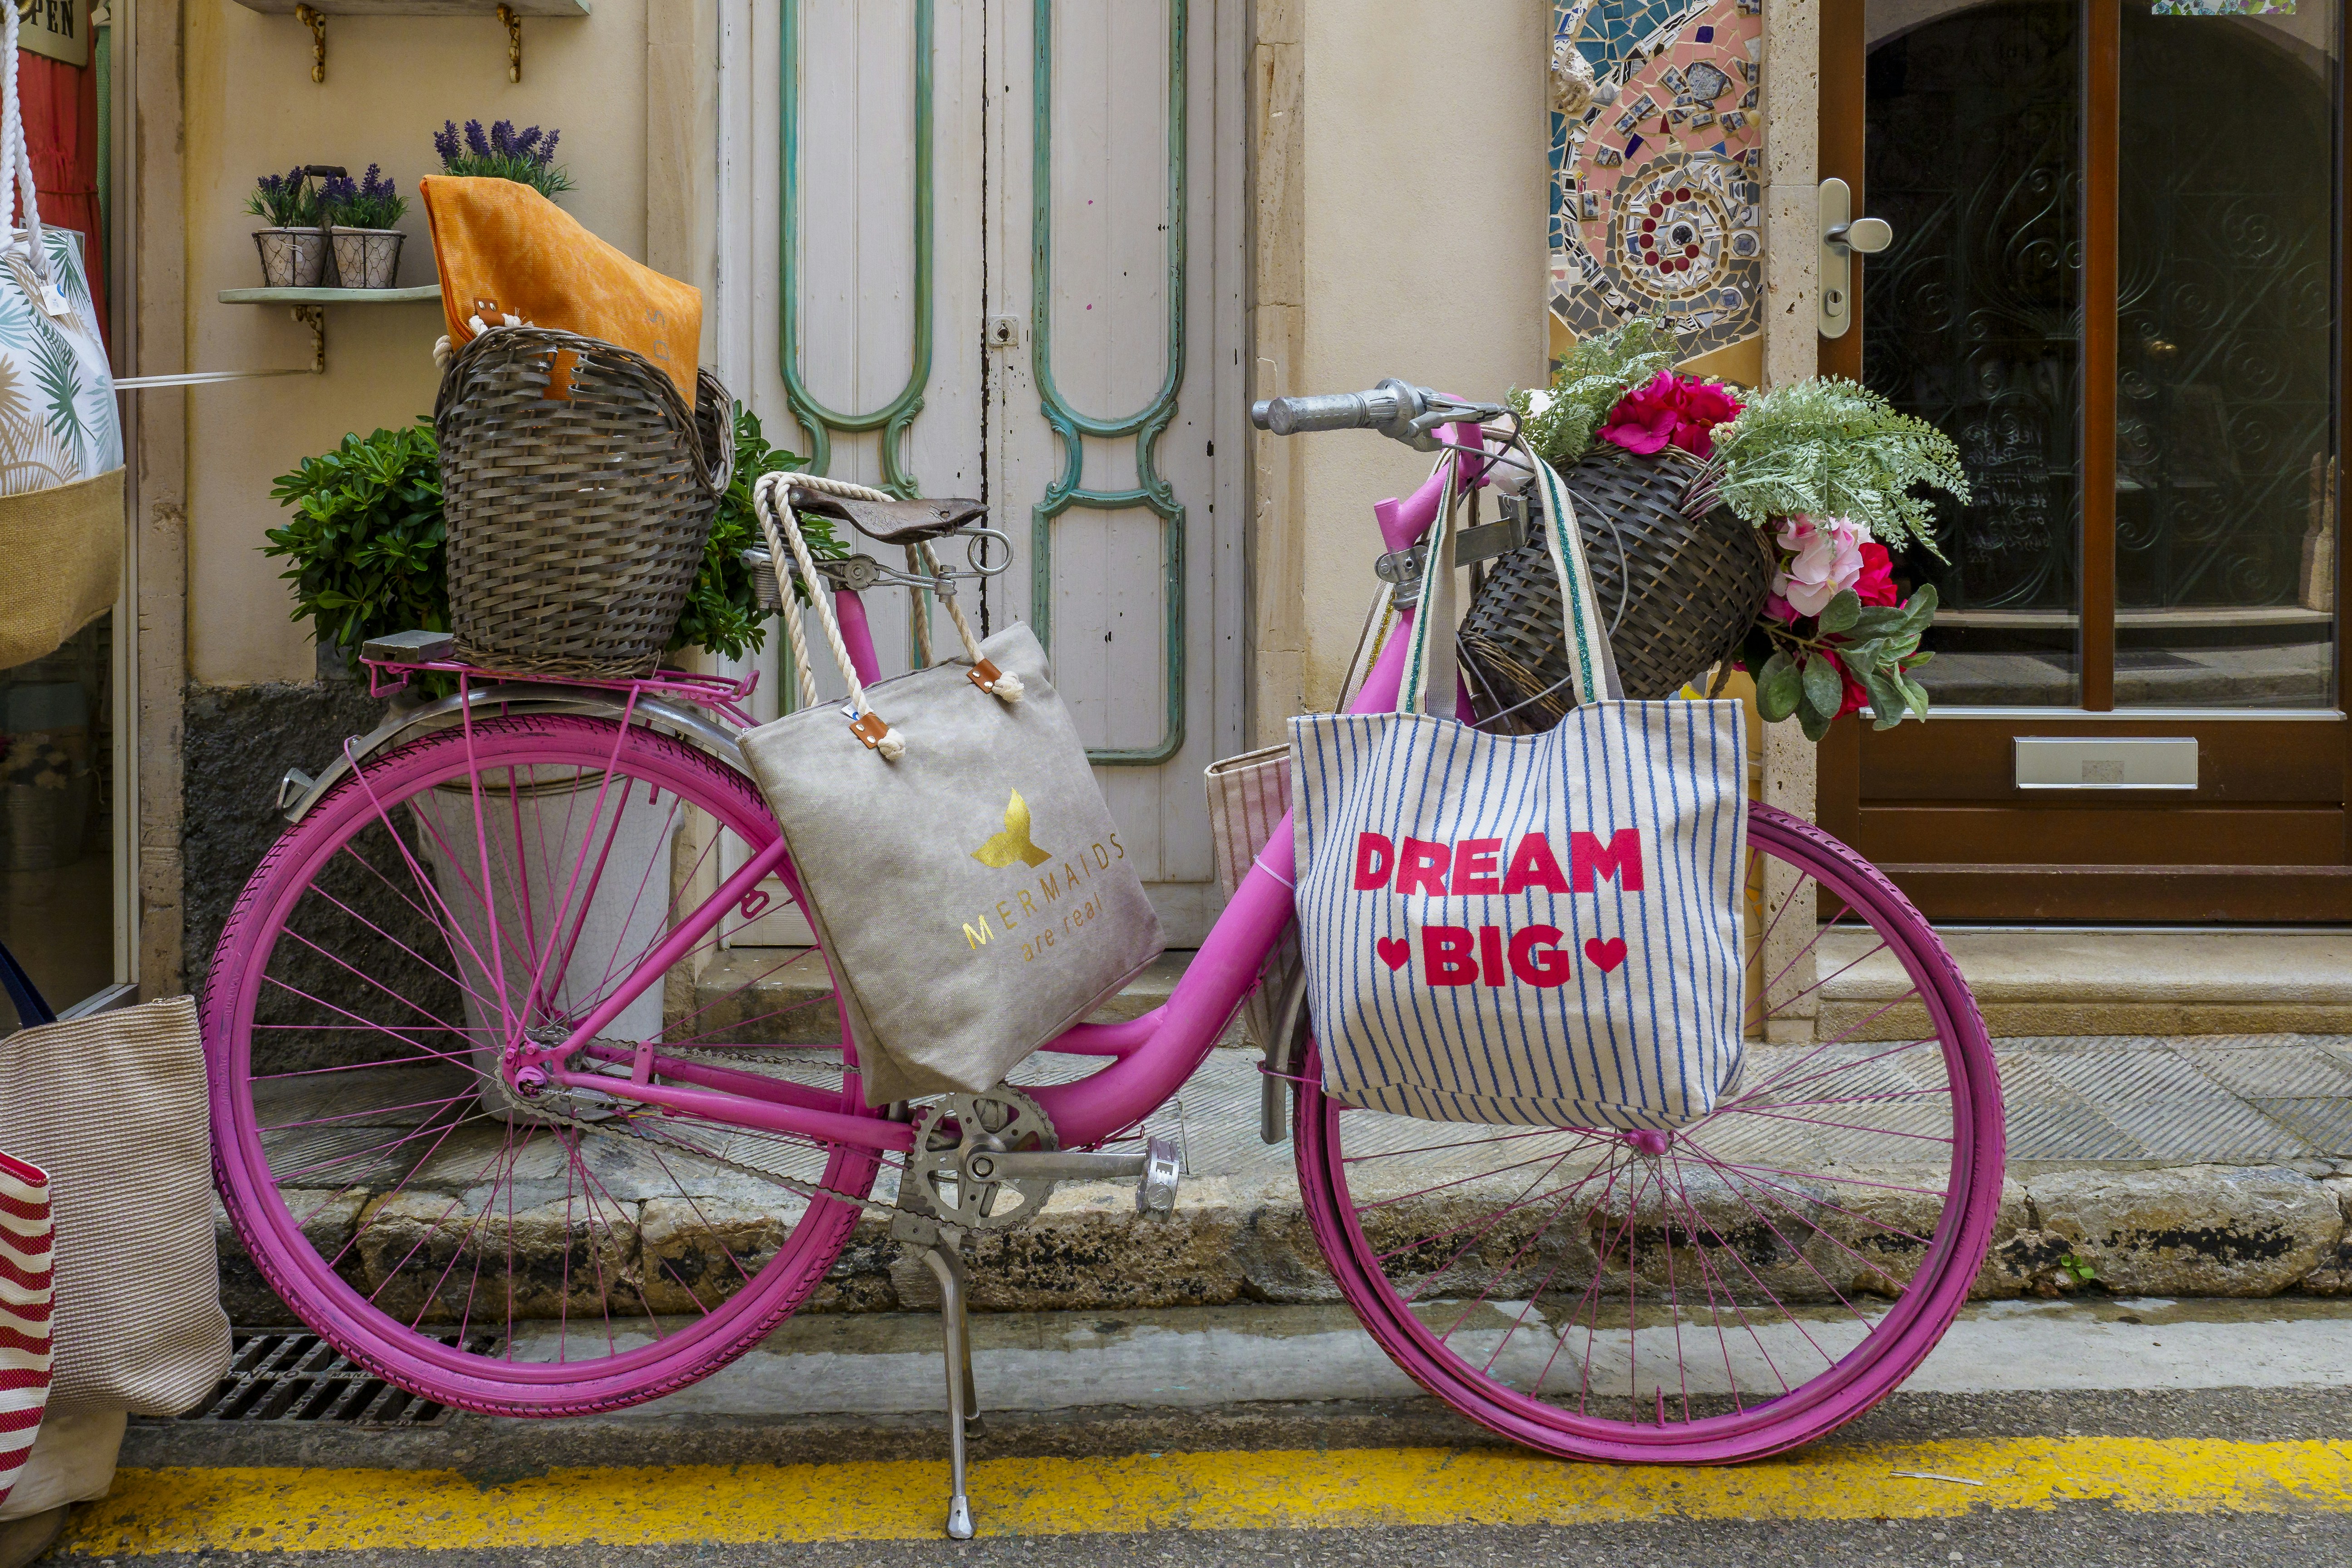 The pink bicycle